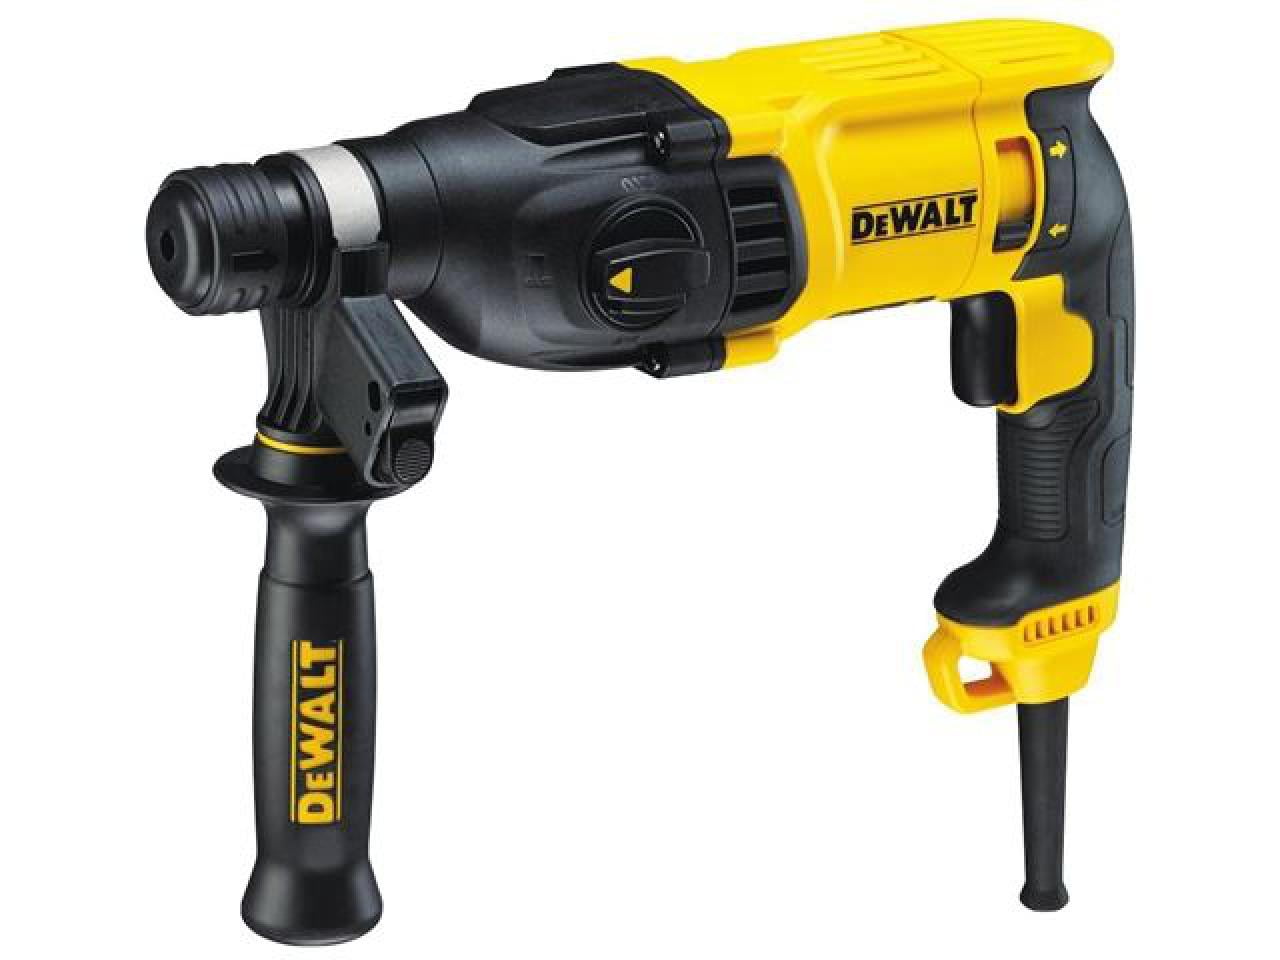 Patronize relay Sightseeing Dewalt-DCD709C2 ATOMIC 20V MAX* Brushless Compact Cordless 1/2 in. Hammer  Drill/Driver Kit - Walmart.com